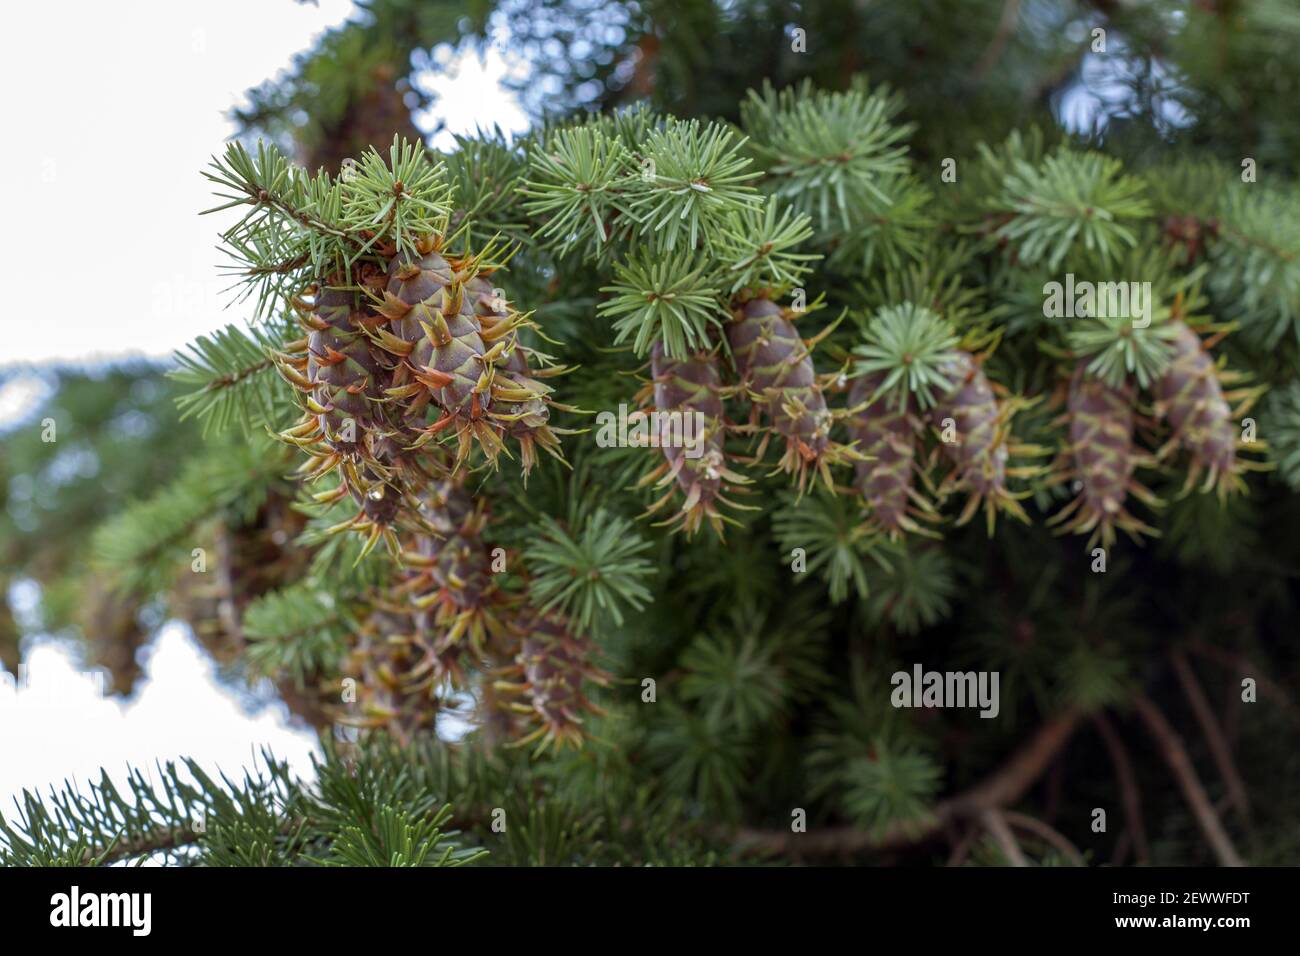 Close-up shot of young Douglas fir cones showing the beautiful green of the needles and the changing colors of the ripening cones. Stock Photo